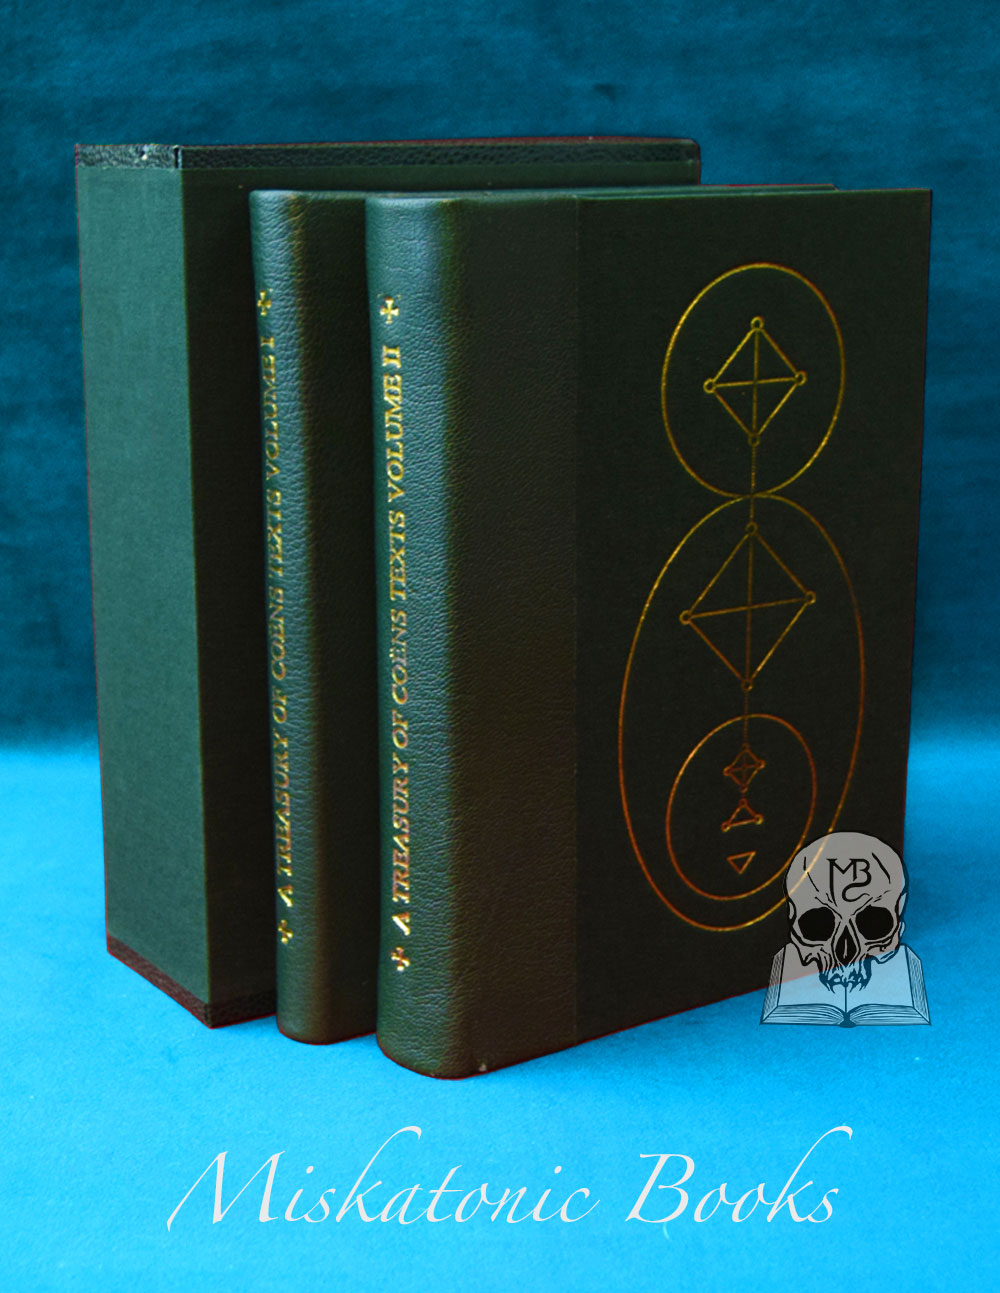 A TREASURY OF COËN TEXTS  IN TWO VOLUMES - Limited Edition Quarter Bound in Leather and Cloth in Custom Slipcase